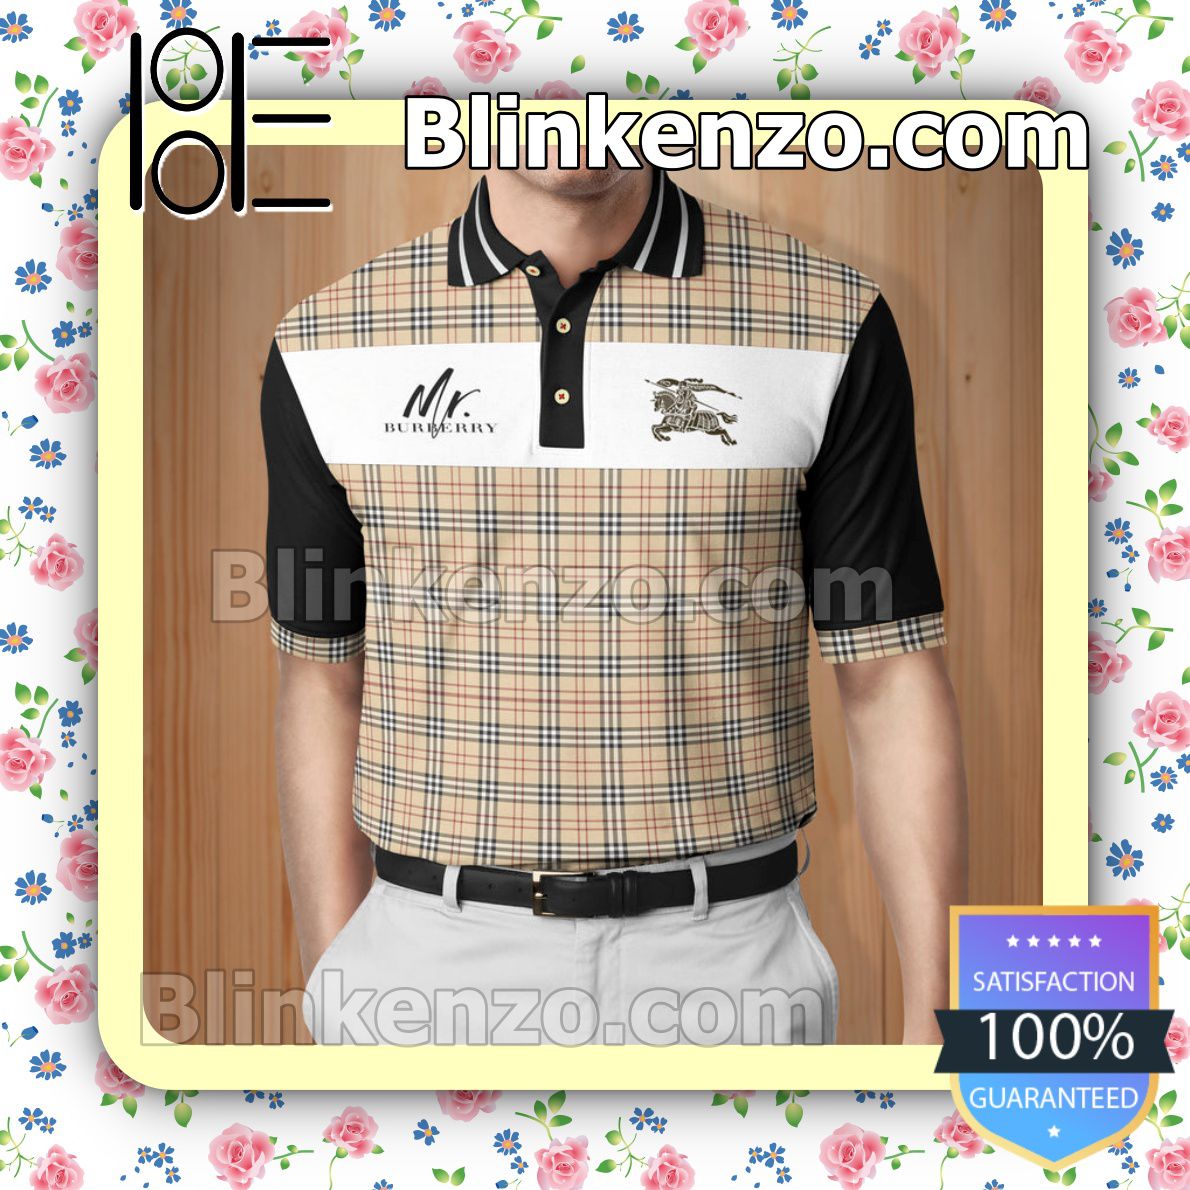 Mr. Burberry Outfit Plaid With Black Sleeves Embroidered Polo Shirts